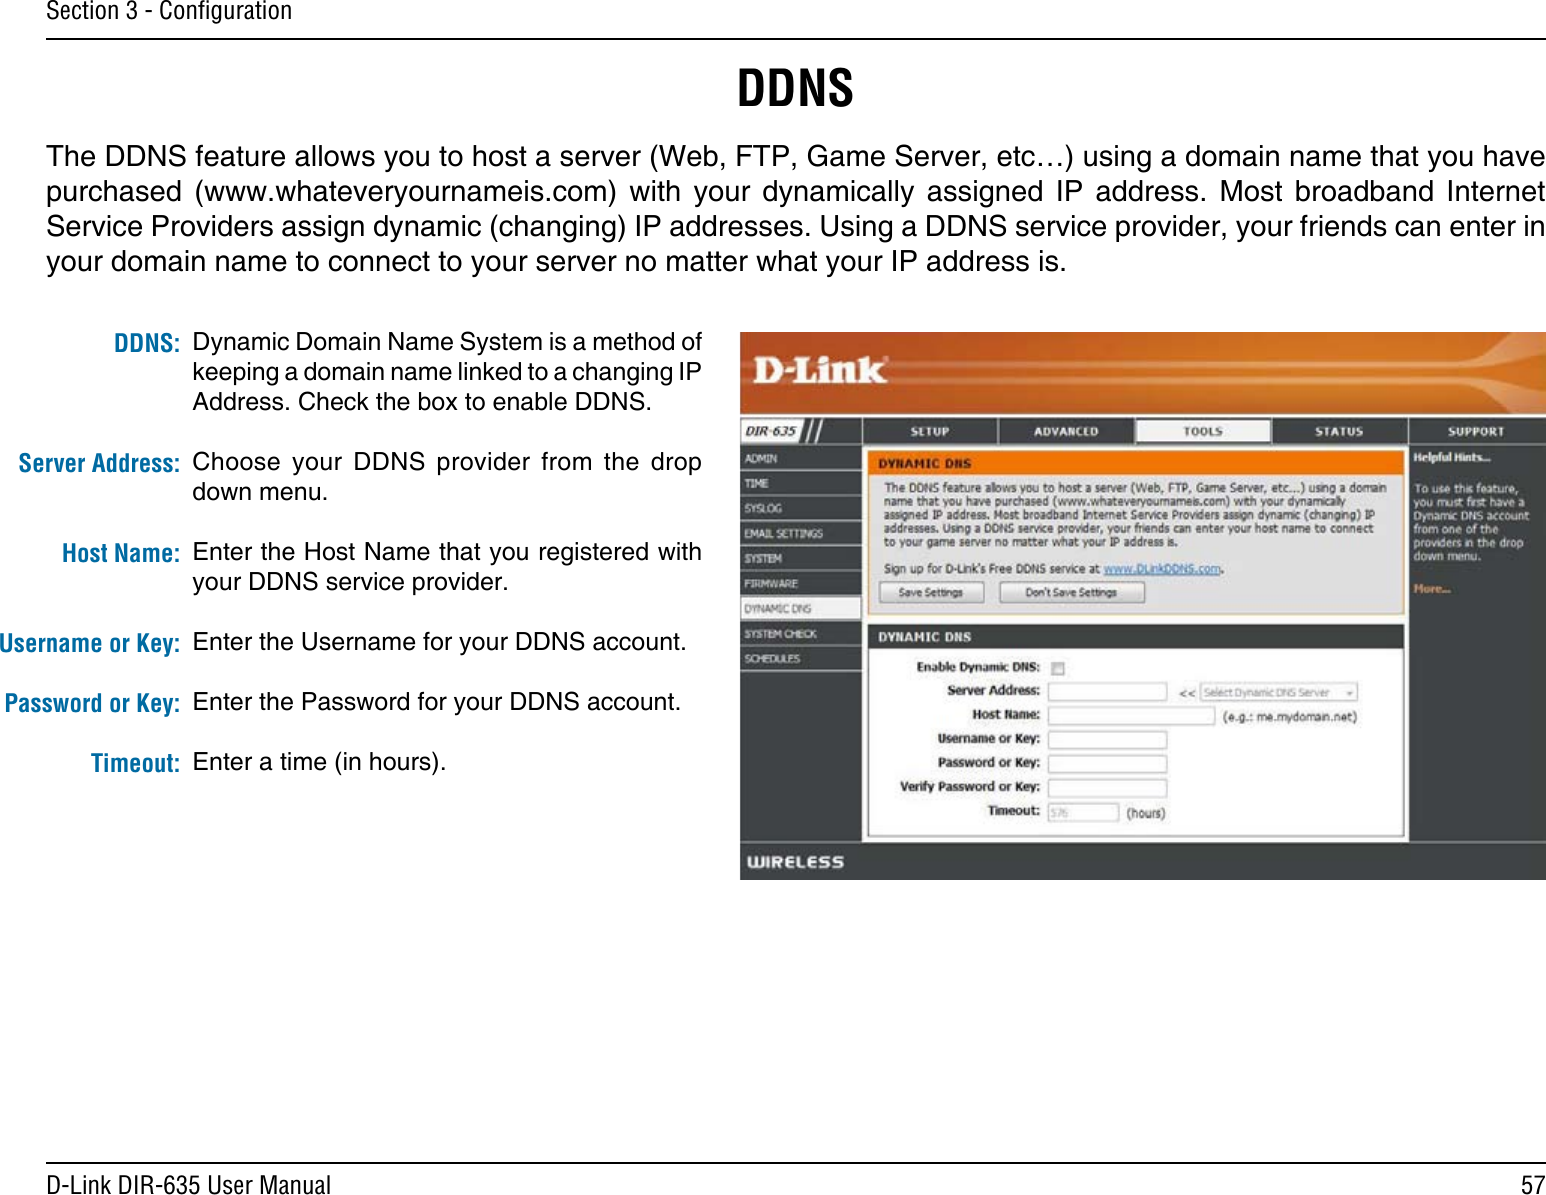 57D-Link DIR-635 User ManualSection 3 - ConﬁgurationDynamic Domain Name System is a method of keeping a domain name linked to a changing IP Address. Check the box to enable DDNS.Choose  your  DDNS  provider  from  the  drop down menu.Enter the Host Name that you registered with your DDNS service provider.Enter the Username for your DDNS account.Enter the Password for your DDNS account.Enter a time (in hours).DDNS:Server Address:Host Name:Username or Key:Password or Key:Timeout:DDNSThe DDNS feature allows you to host a server (Web, FTP, Game Server, etc…) using a domain name that you have purchased  (www.whateveryournameis.com)  with  your  dynamically  assigned  IP  address.  Most  broadband  Internet Service Providers assign dynamic (changing) IP addresses. Using a DDNS service provider, your friends can enter in your domain name to connect to your server no matter what your IP address is.